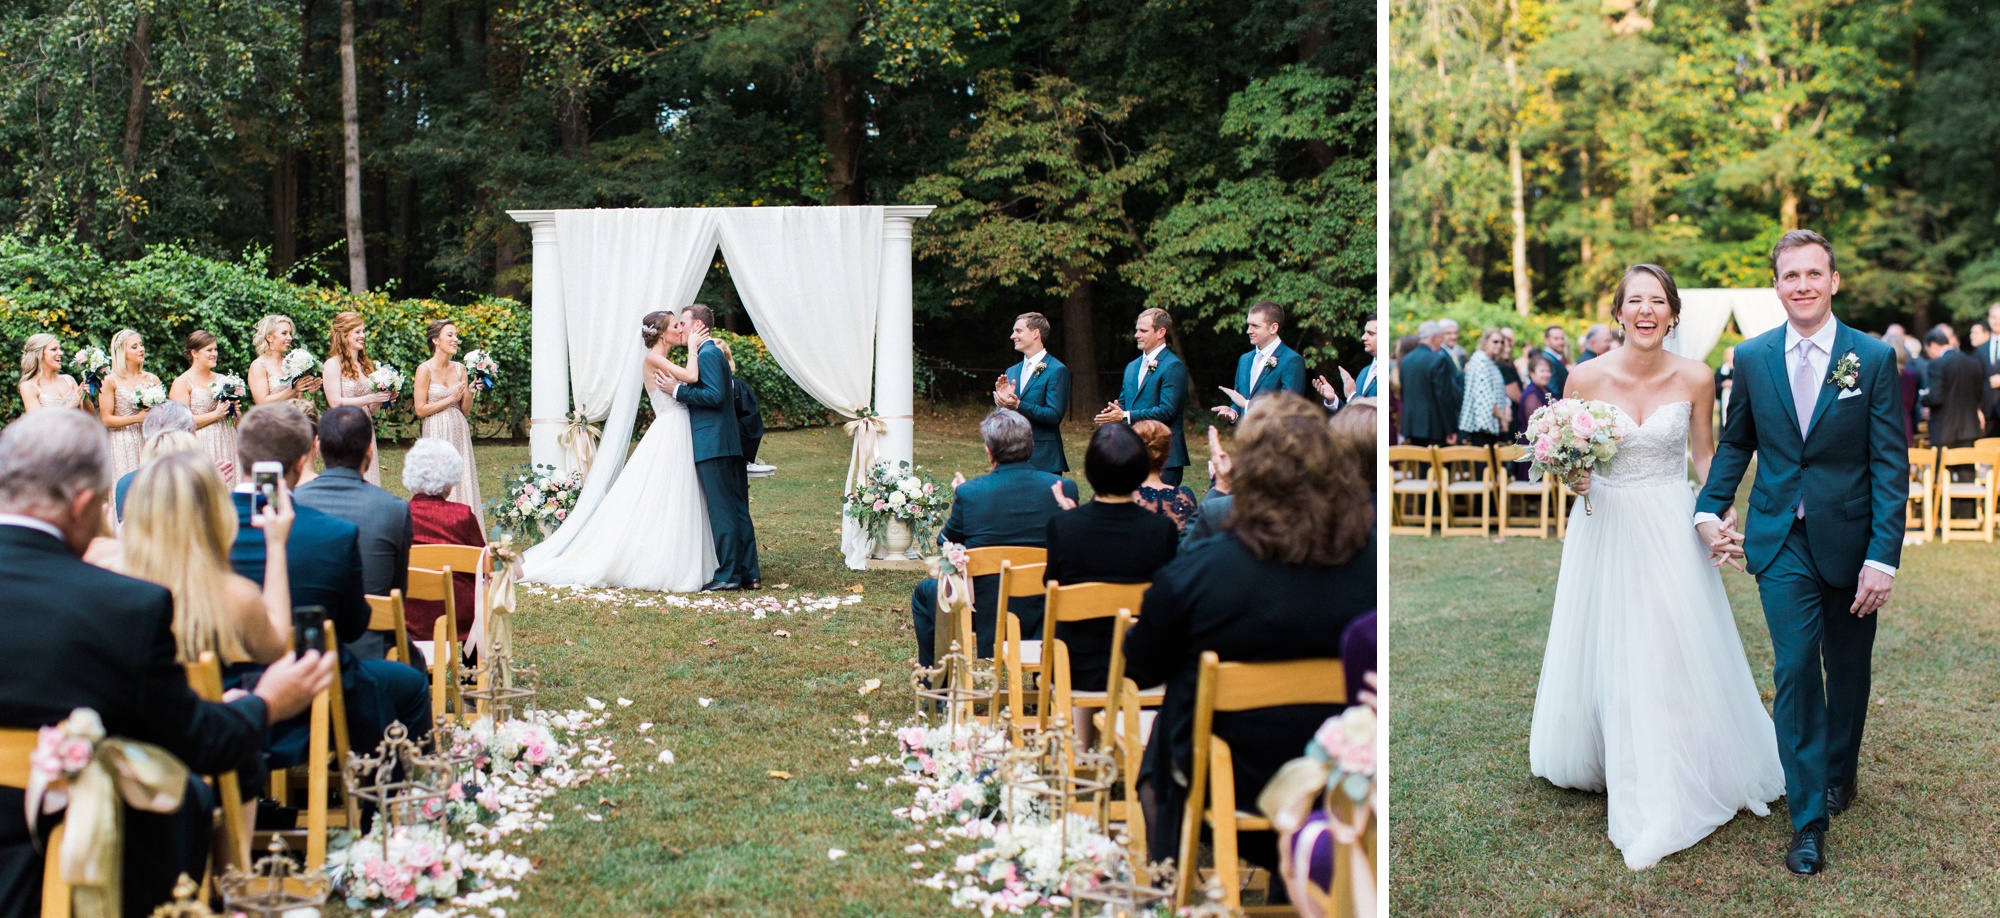 Little River Farms provides a beautiful backdrop for your outdoor wedding!